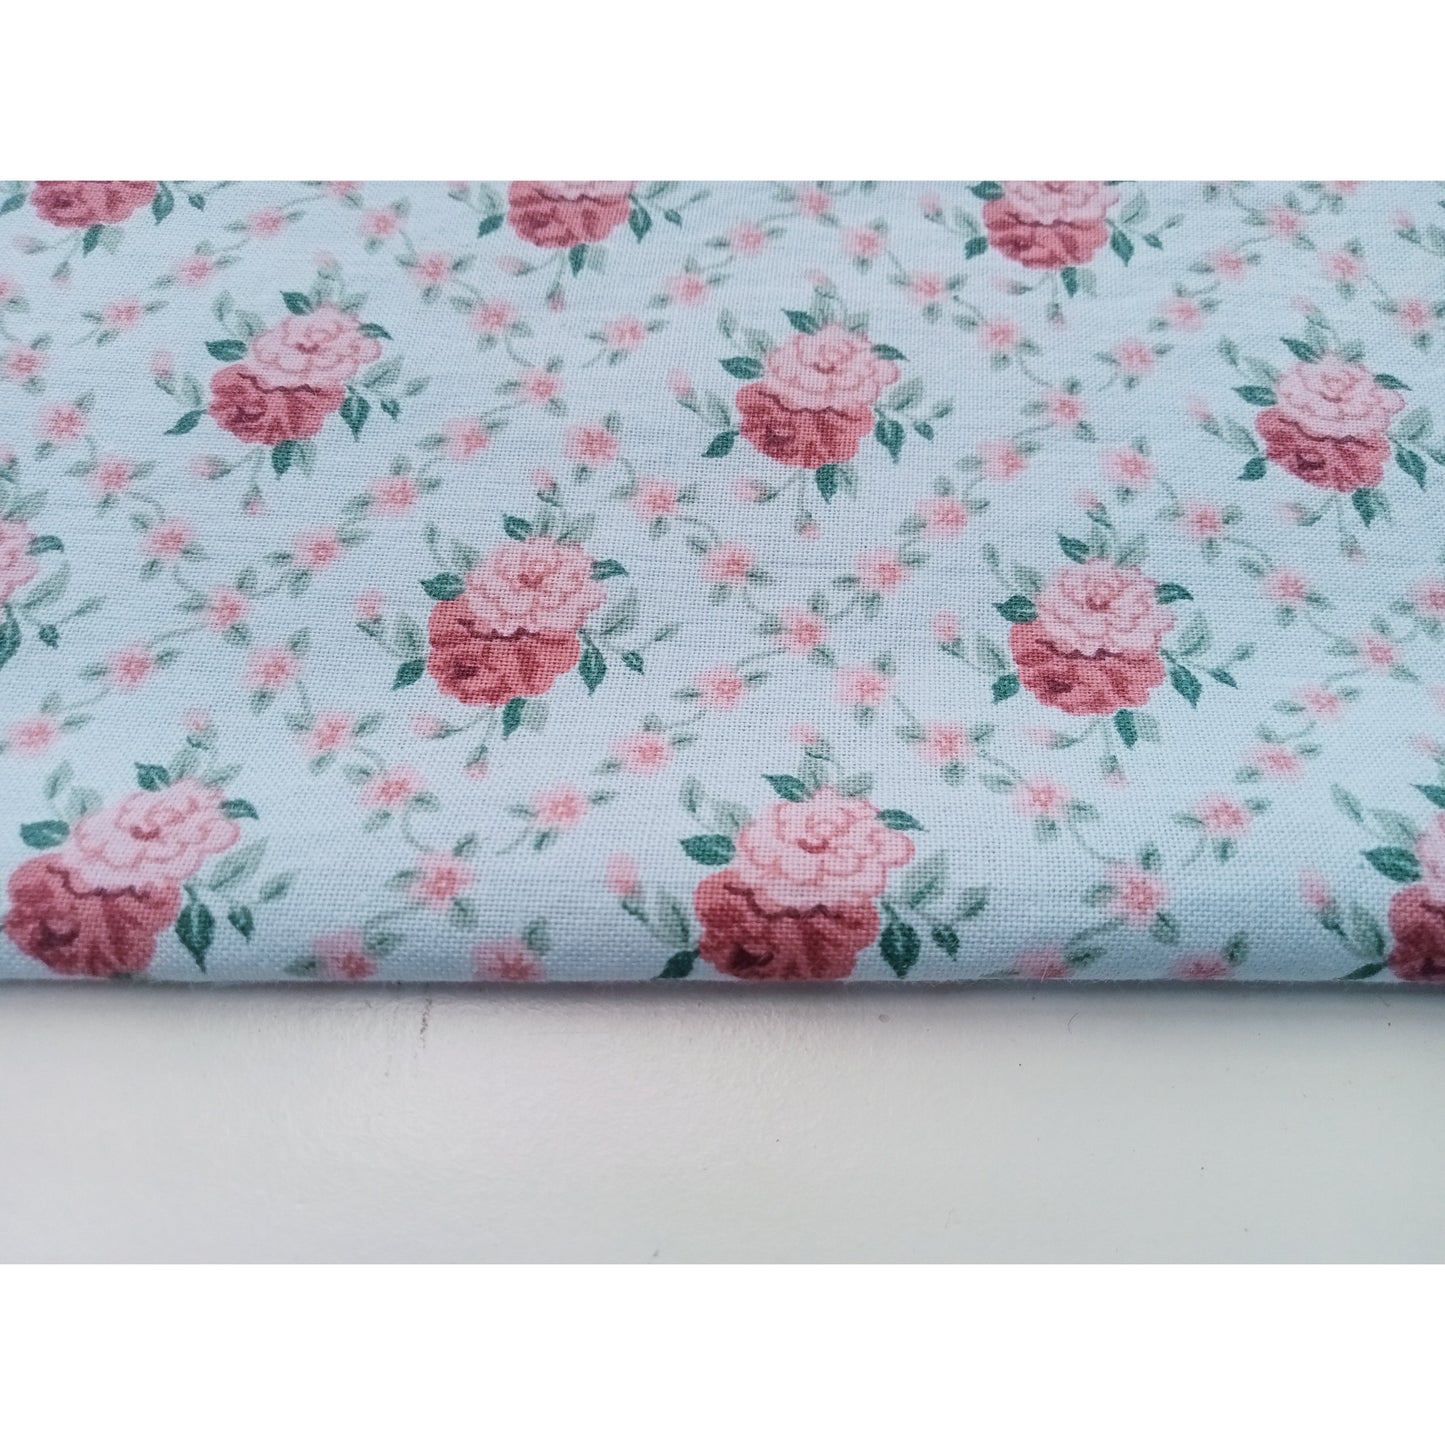 Strawberries & cream - floral printed cotton fabric - sold by 1/2mtr